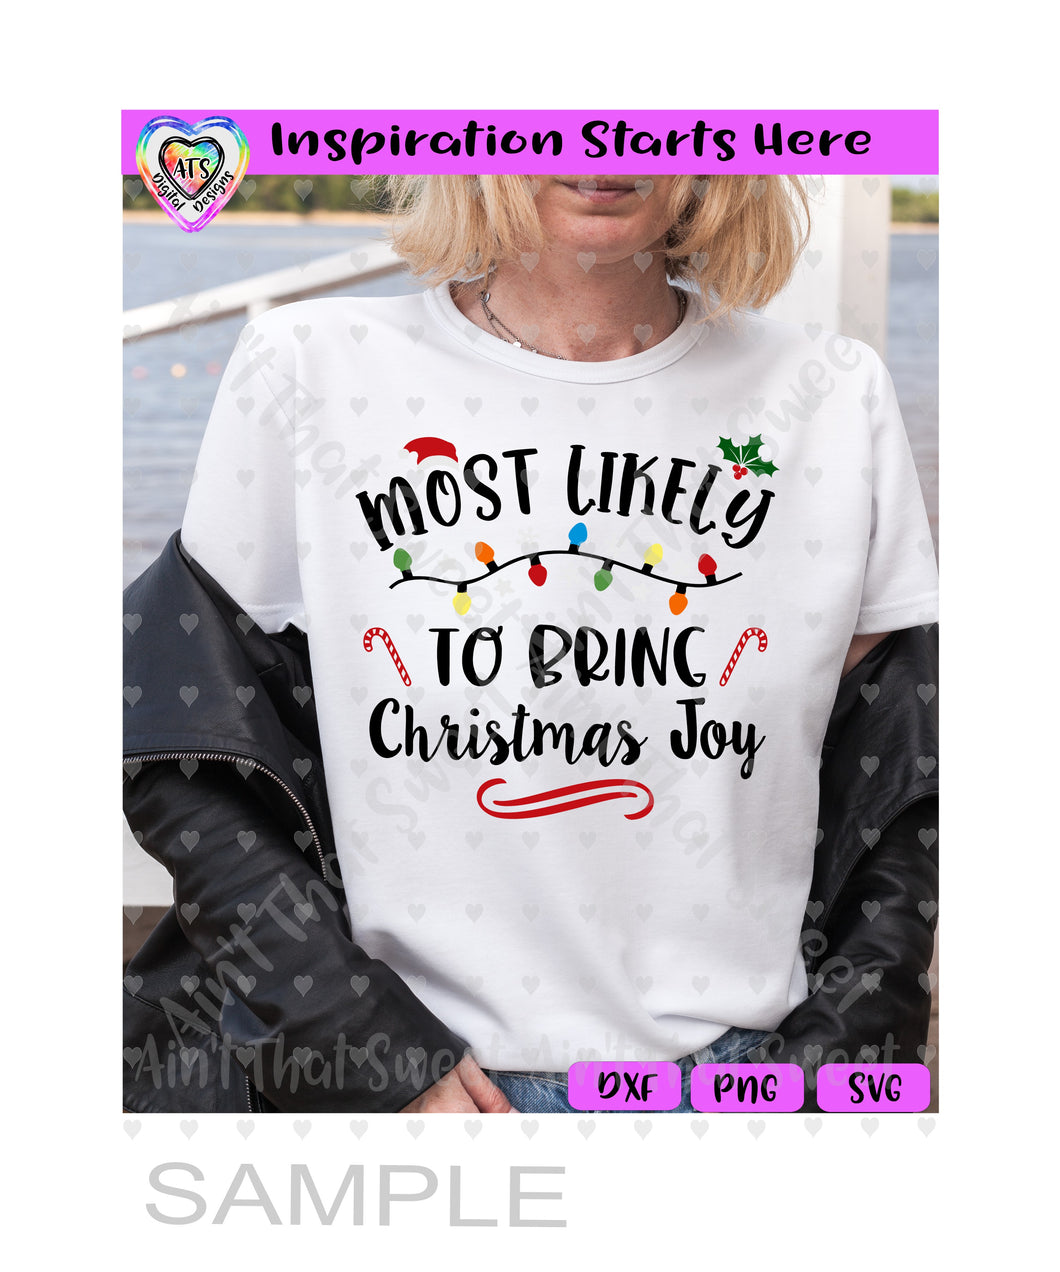 Most Likely To Bring Christmas Joy - Transparent PNG SVG DXF - Silhouette, Cricut, ScanNCut